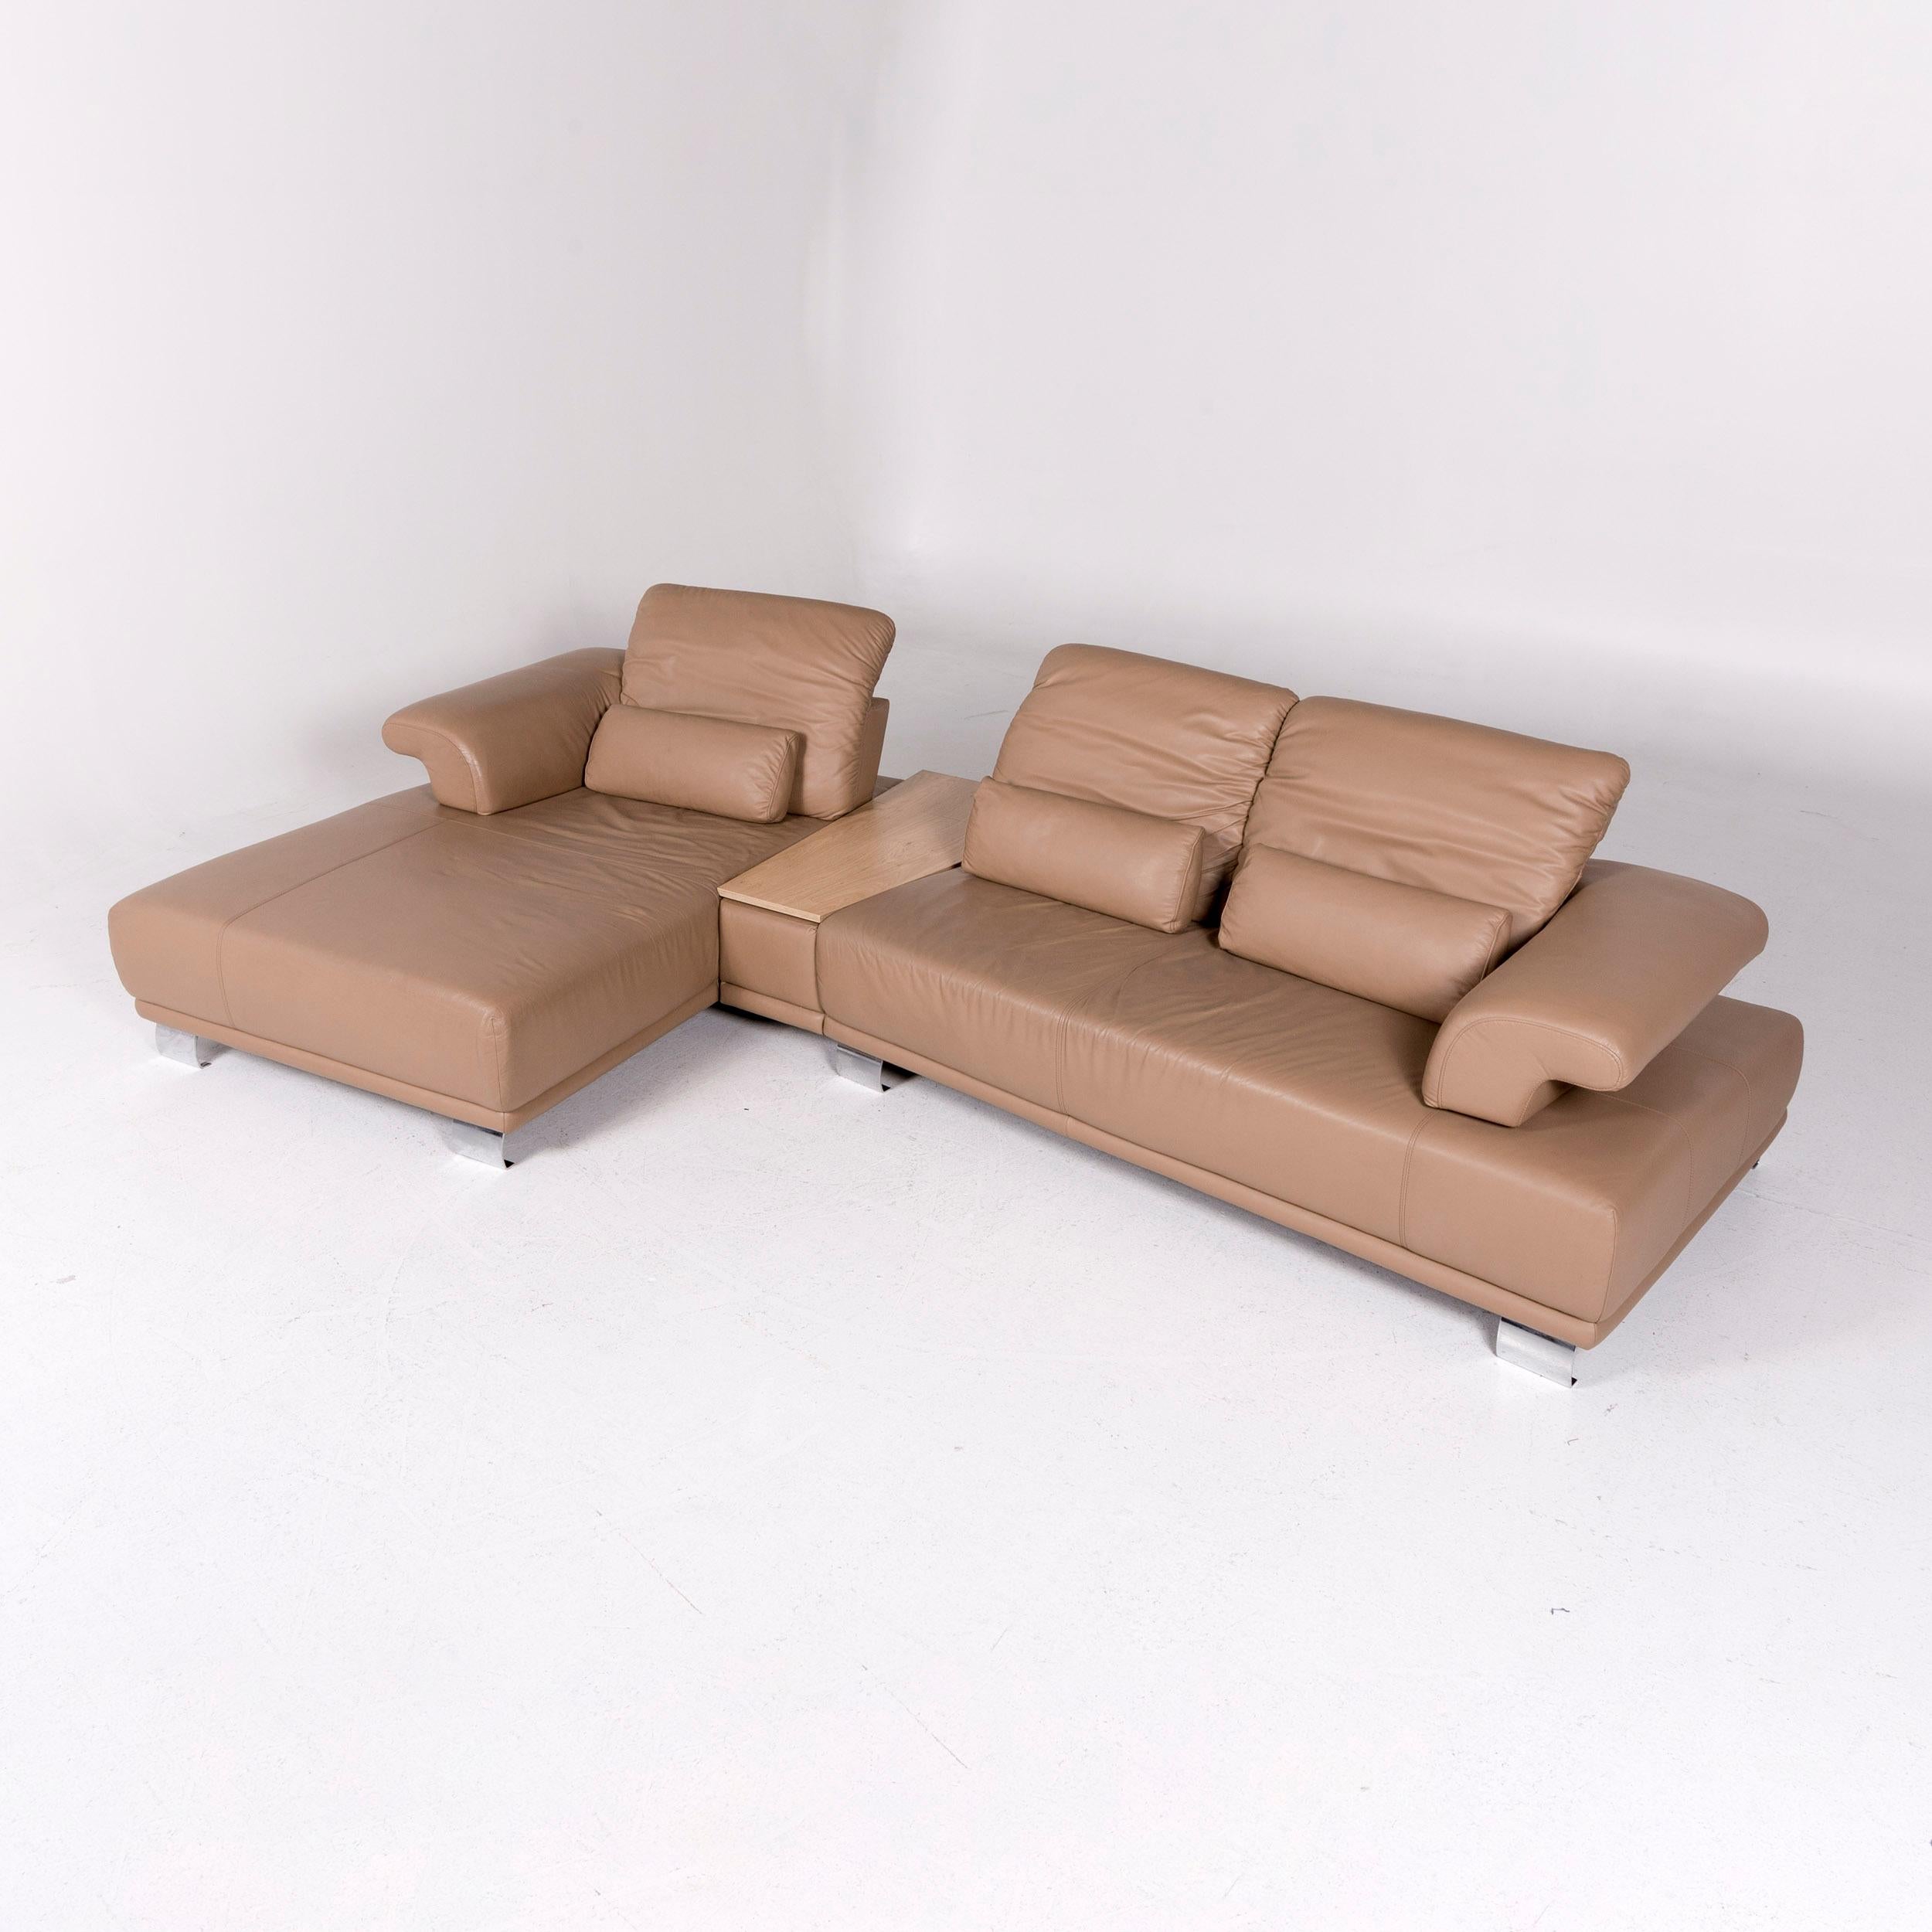 We bring to you a Koinor leather corner sofa beige sofa function couch.

 
 Product measurements in centimeters:
 
Depth 117
Width 188
Height 76
Seat-height 40
Rest-height 63
Seat-depth 137
Seat-width 70
Back-height 46.